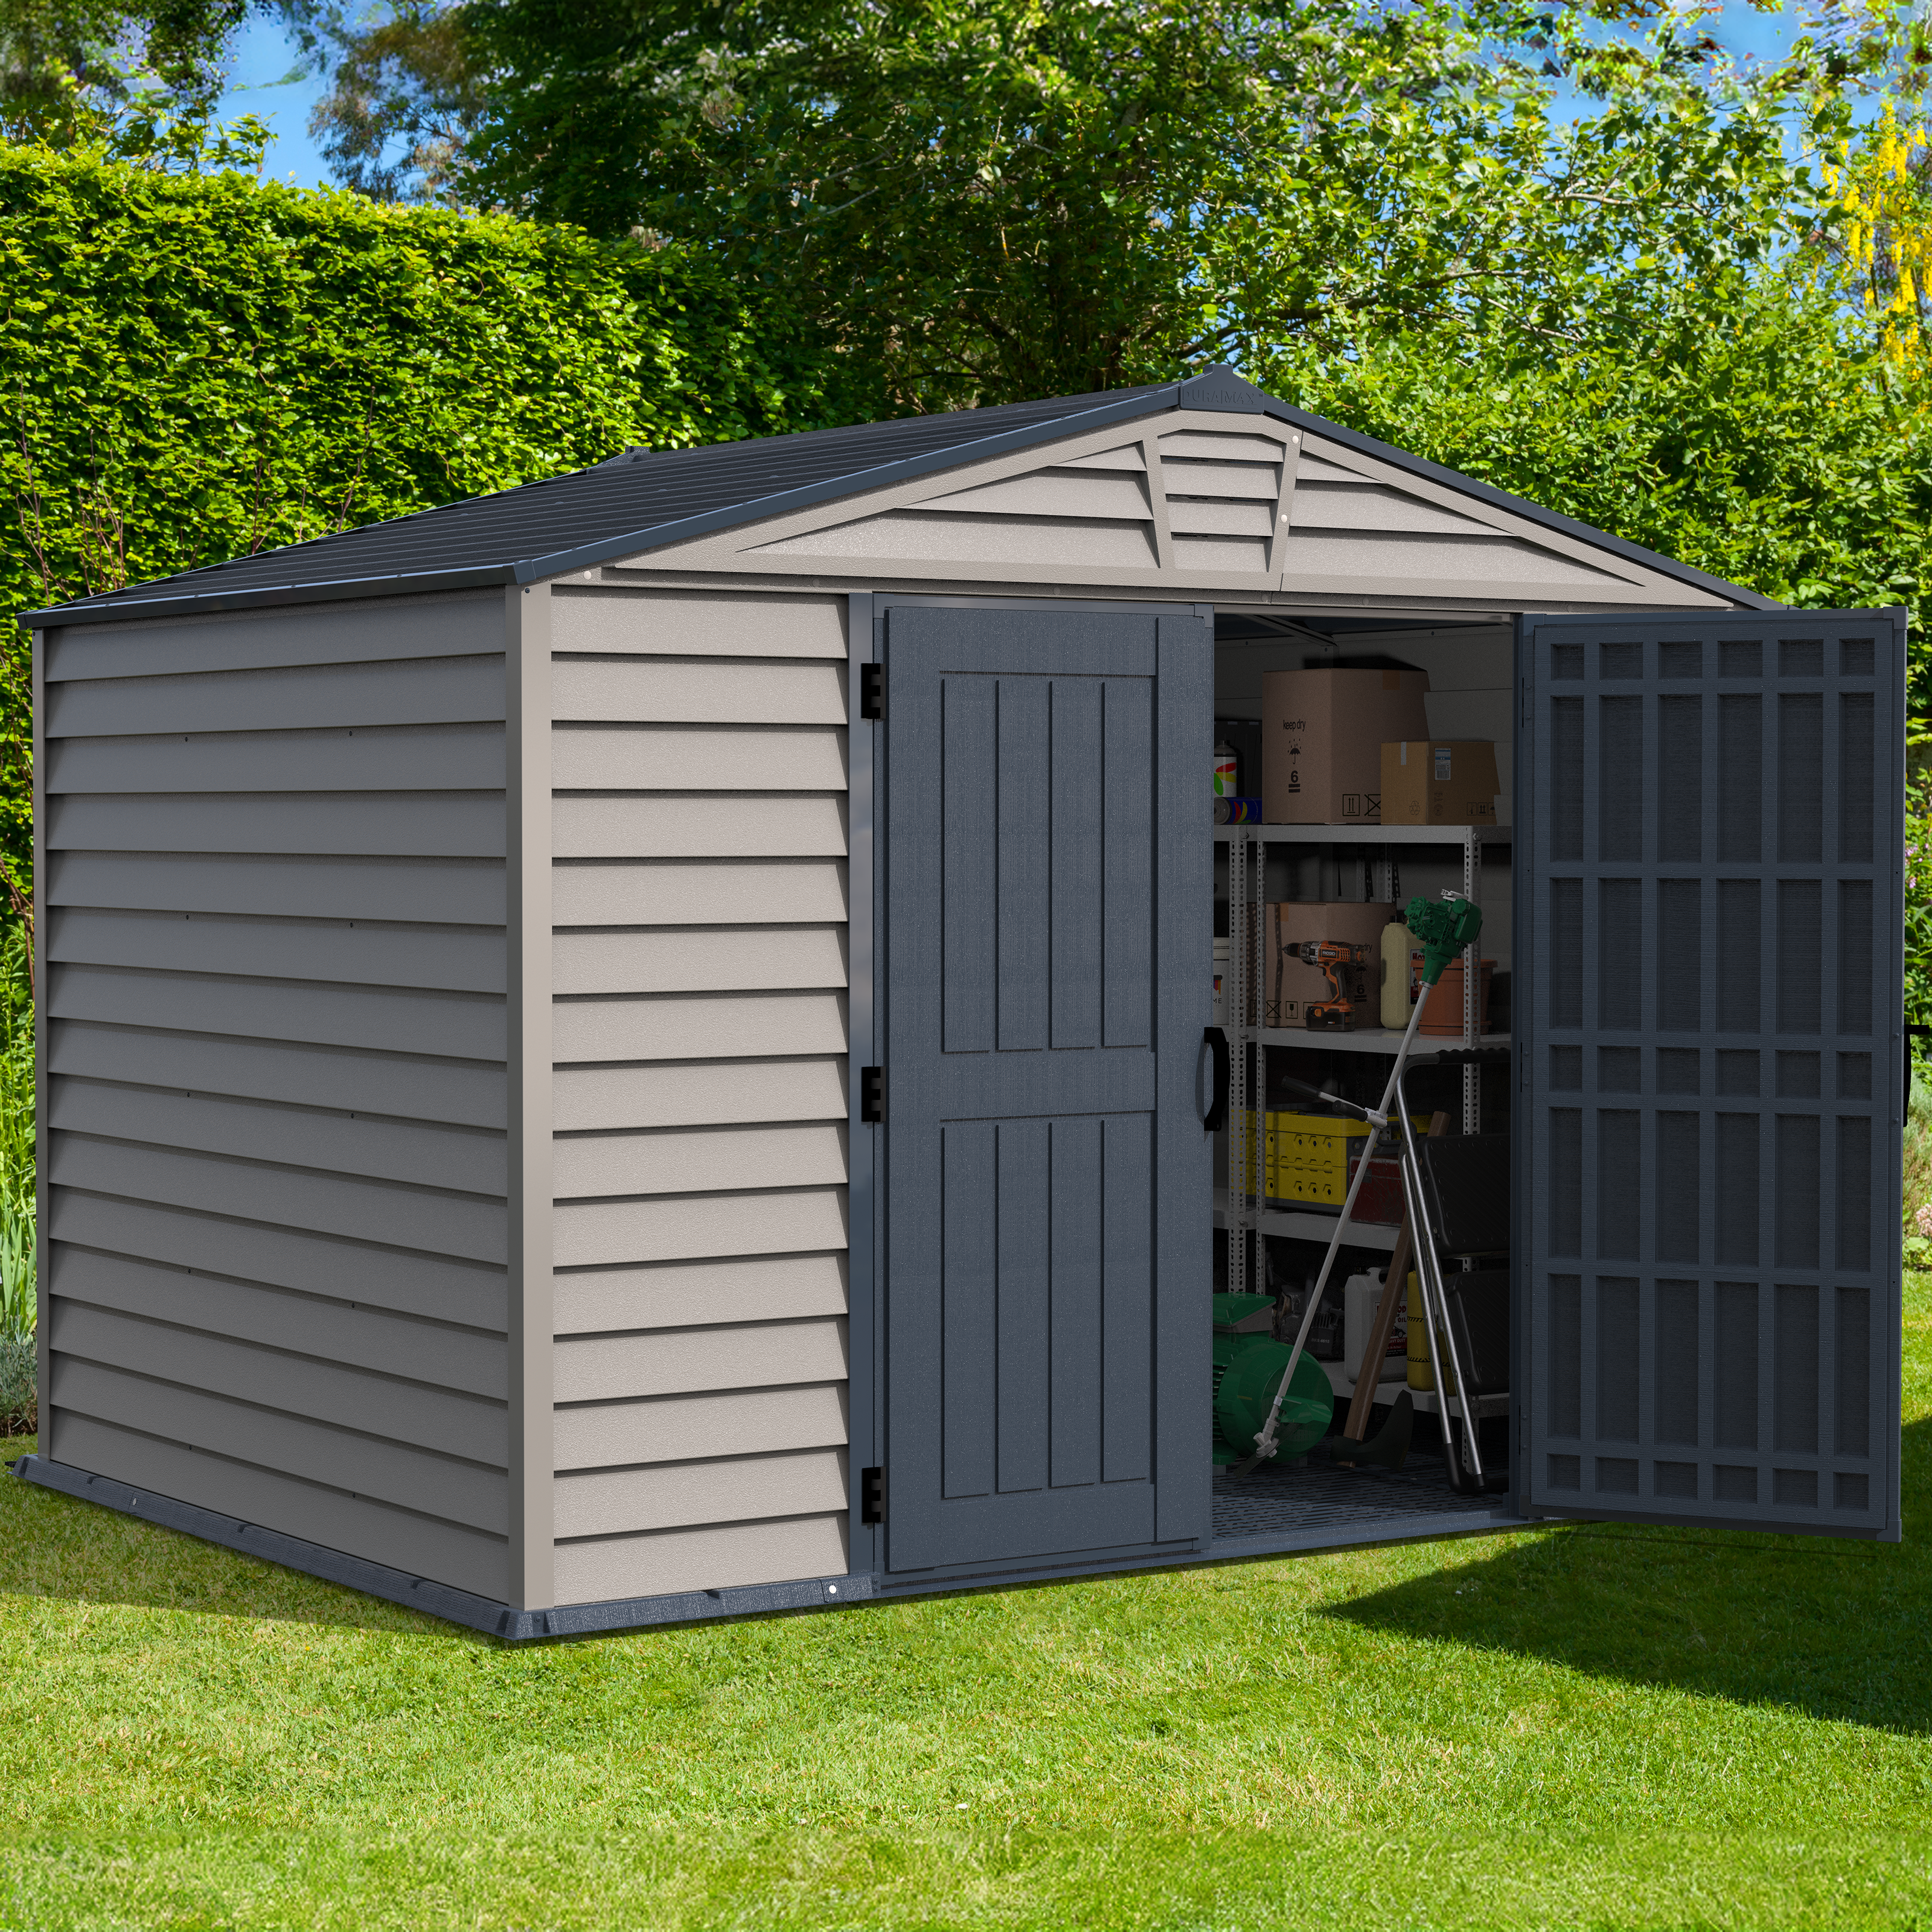 Duramax Vinyl Sheds DuraMax StoreMax Plus 10.5x8 Ft with Molded Floor Vinyl Storage Shed